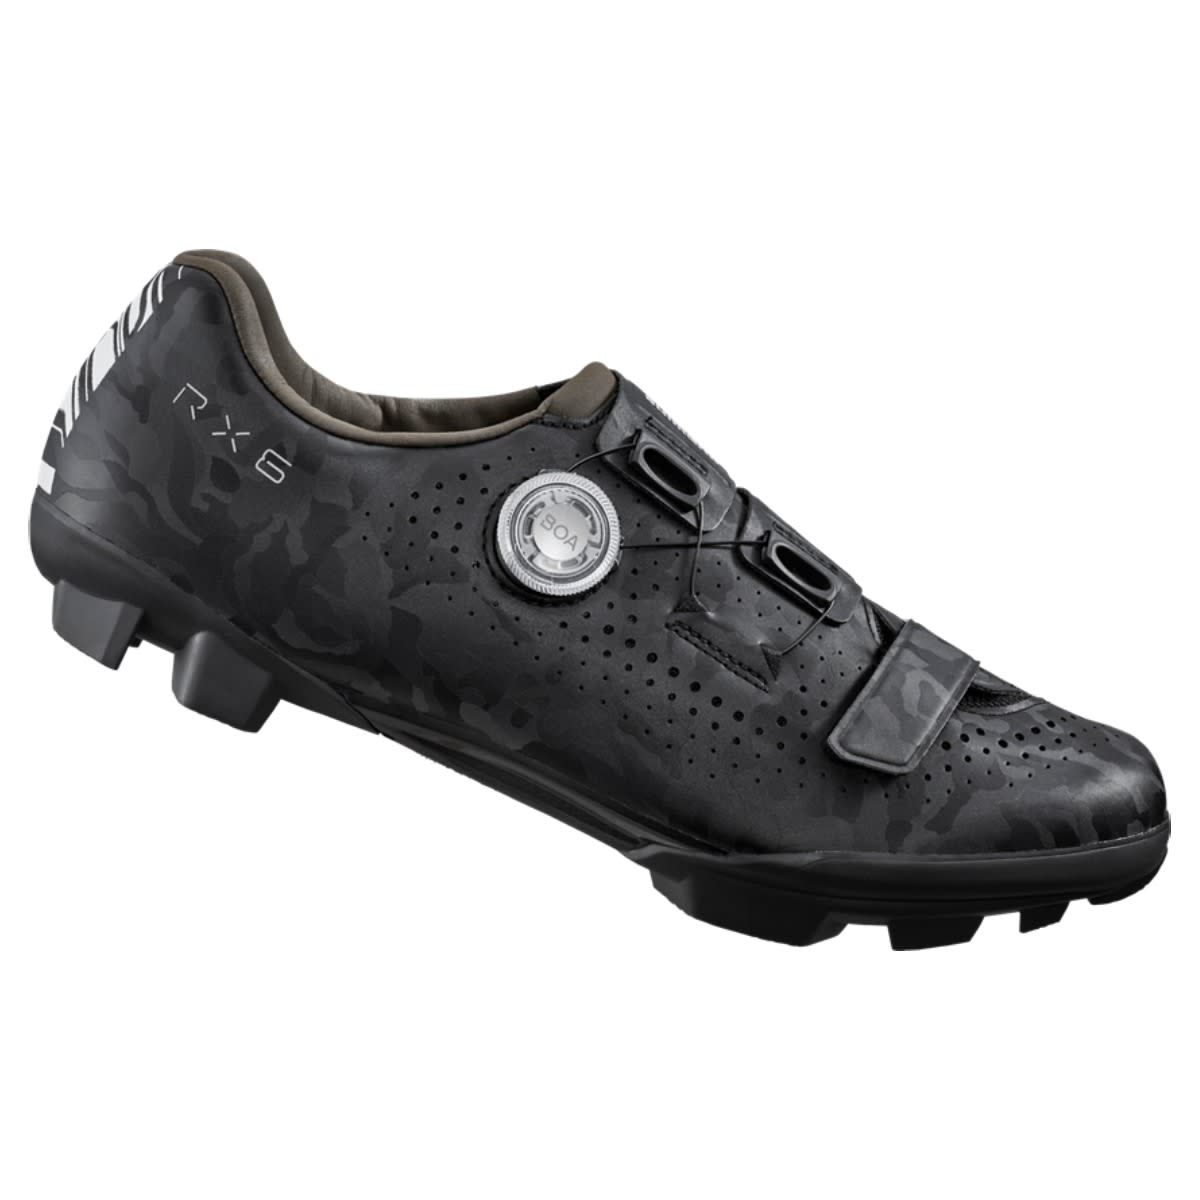 Chaussures Shimano RX600